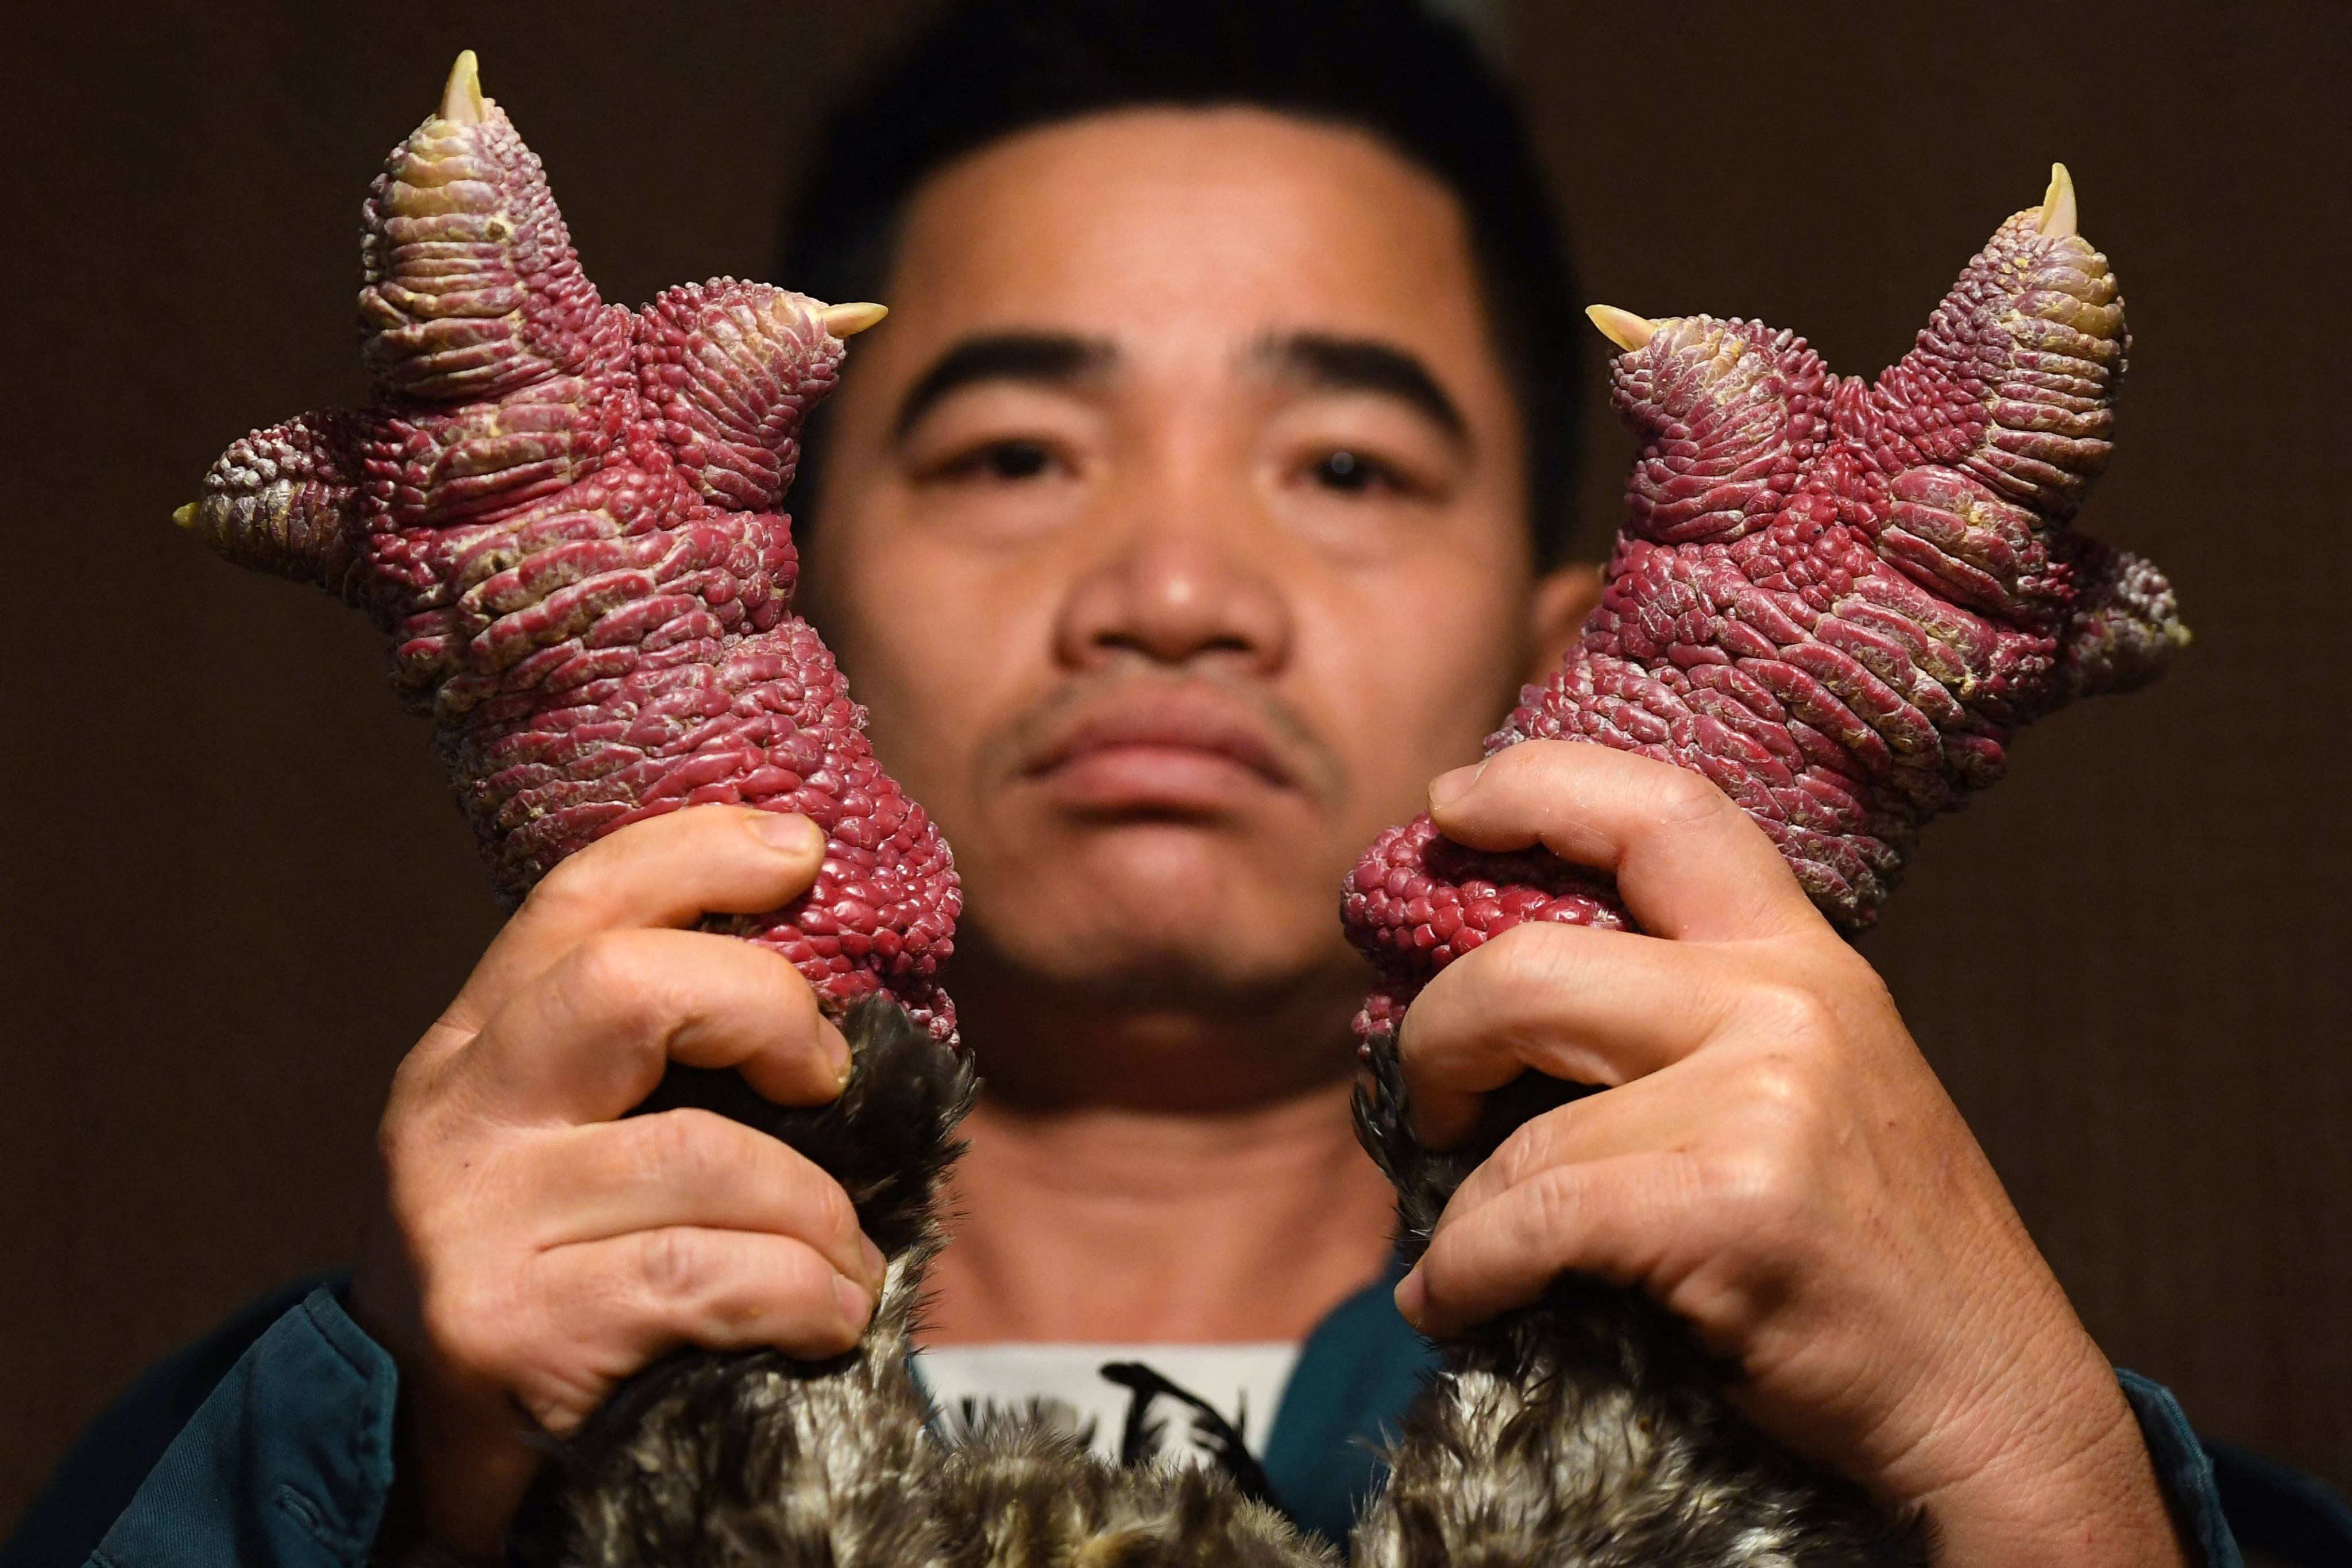 Poultry farmer Le Van Hien holds the legs of a Dong Tao chicken at his farm in Hung Yen province. Photo: AFP